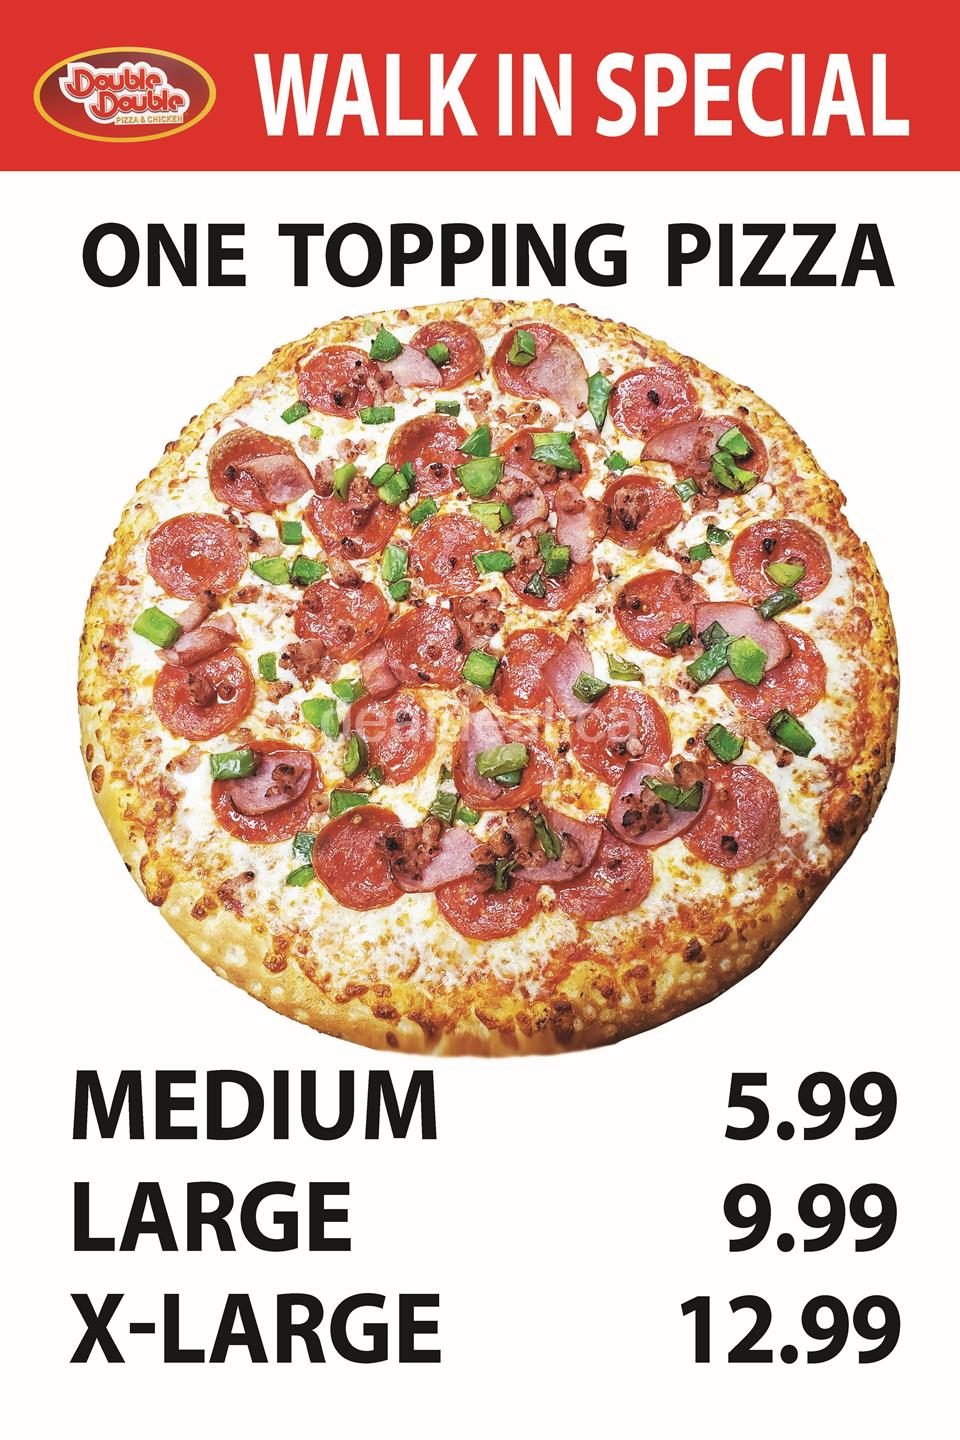 Walk in Special - One Topping Pizza Starts $5.99 at Double Double Pizza & Chicken - Kingston Rd